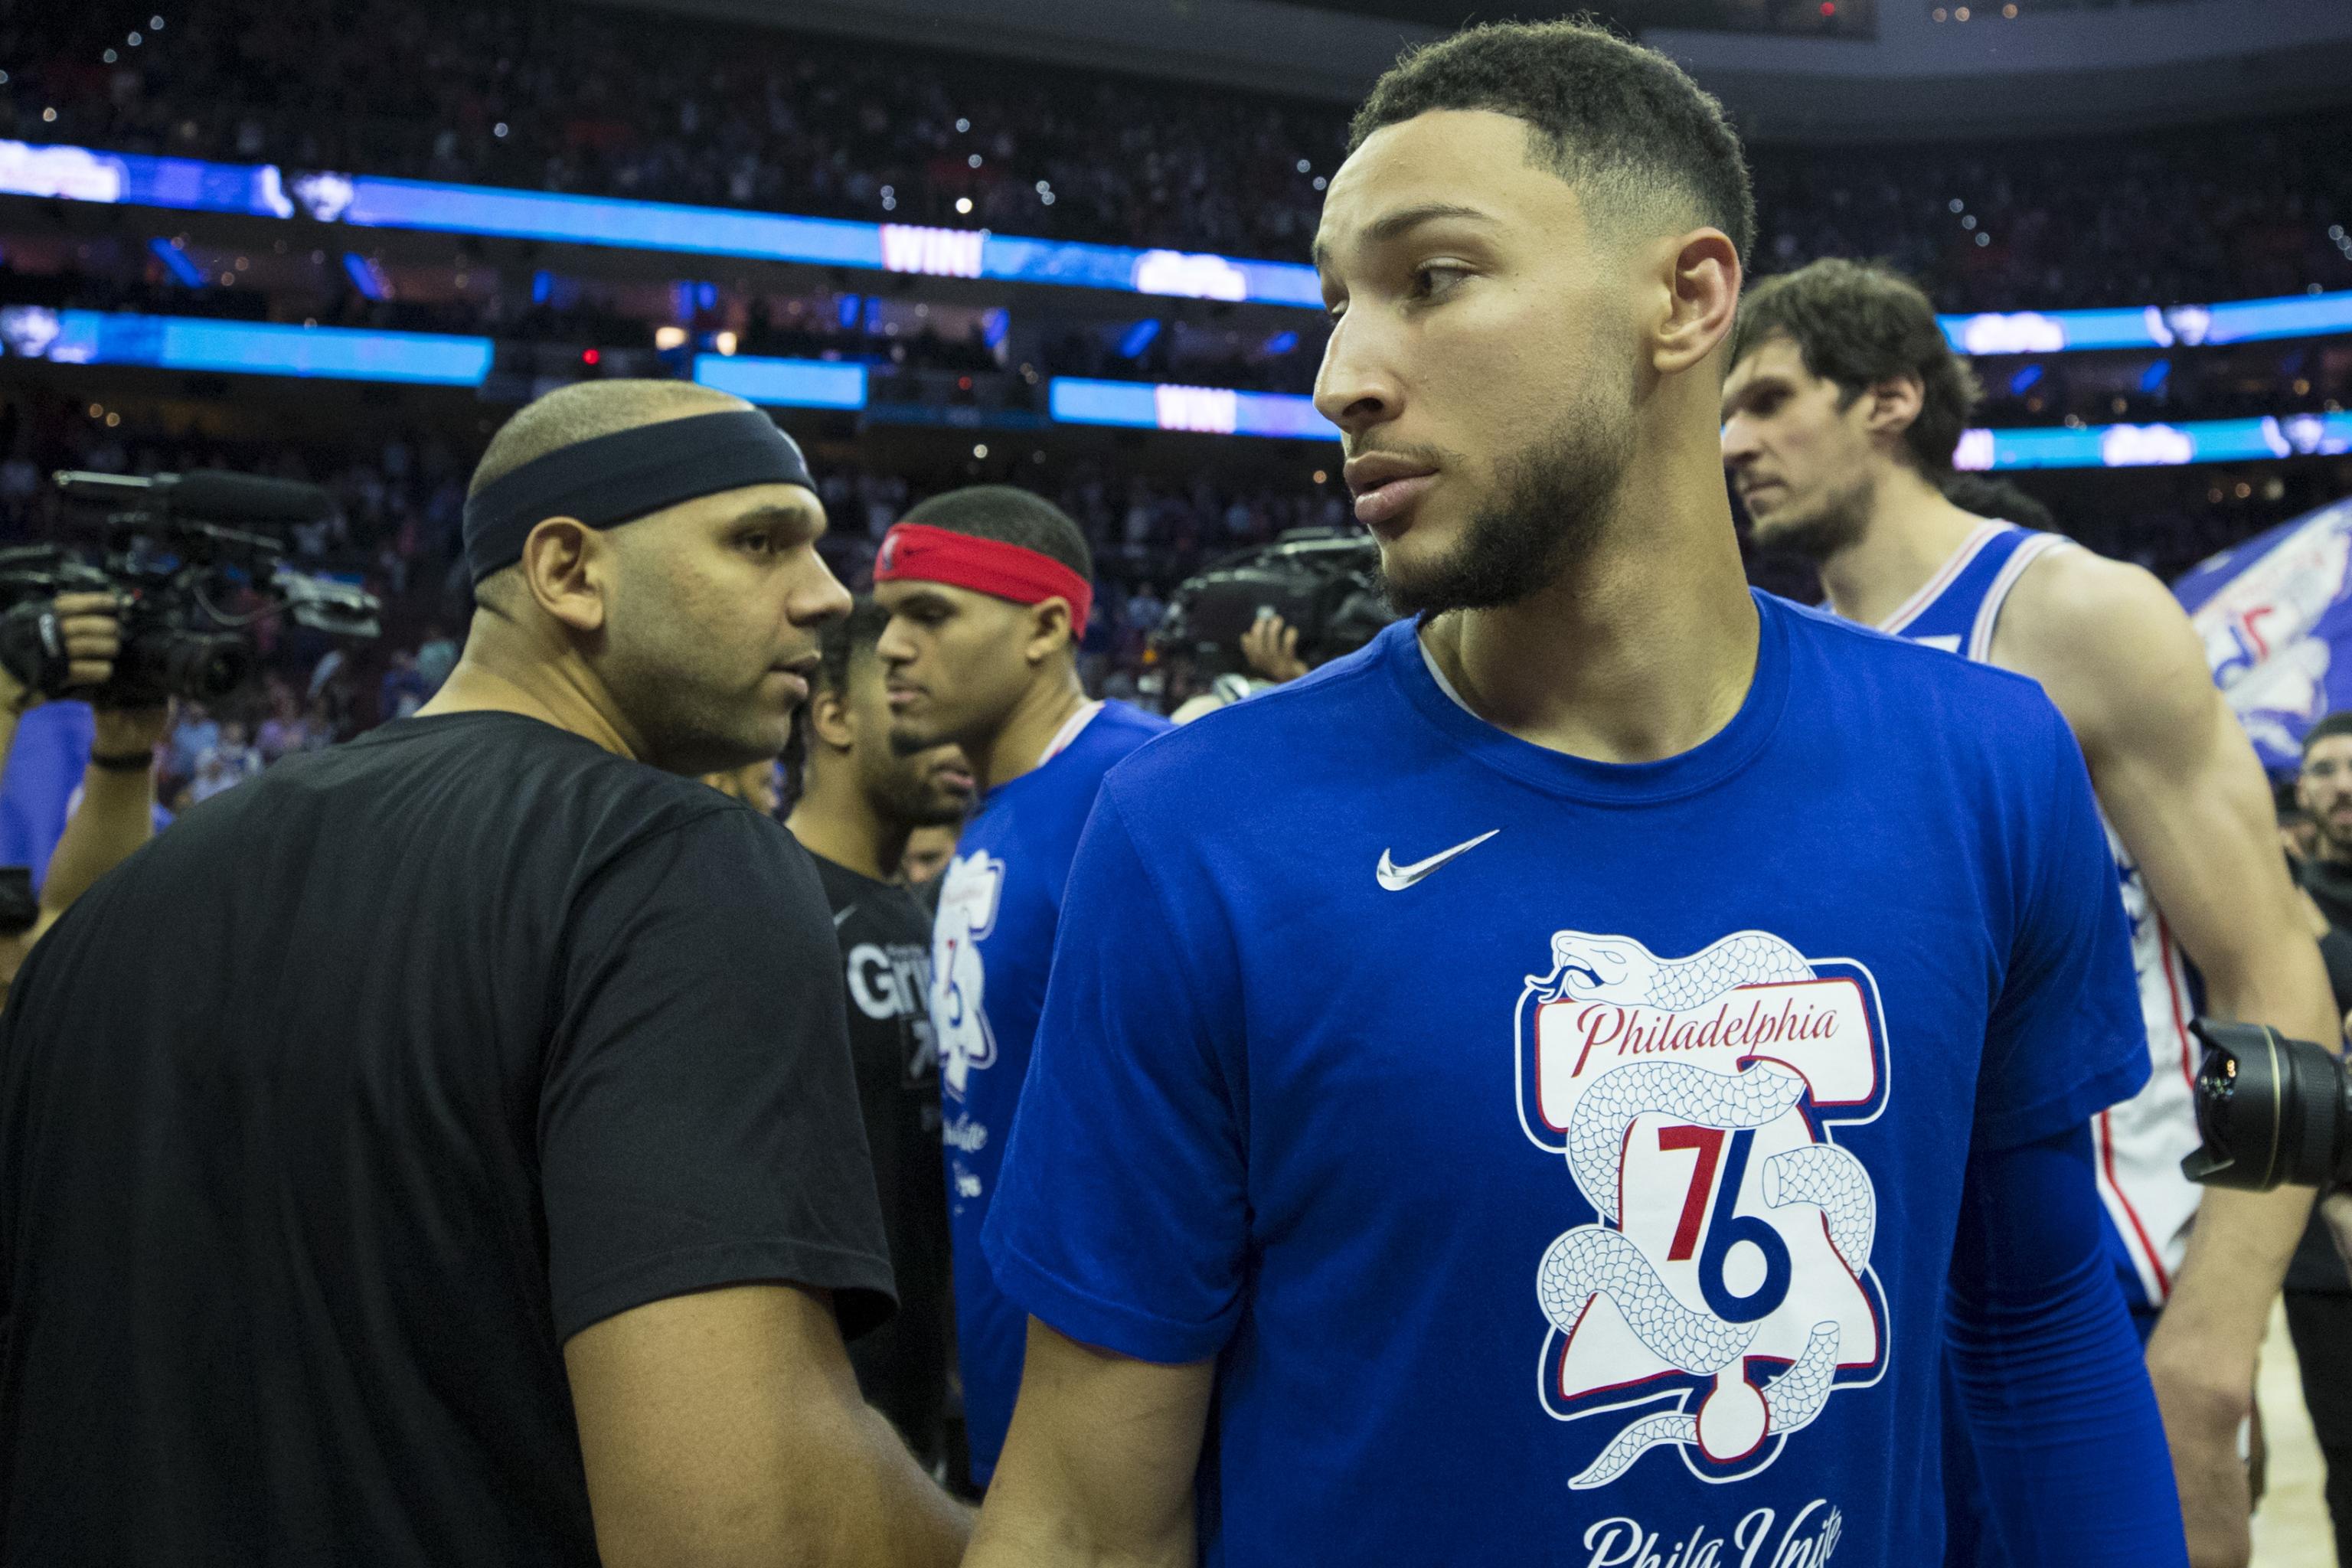 Jimmy Butler and Jared Dudley ejected as Sixers win Game 4 over